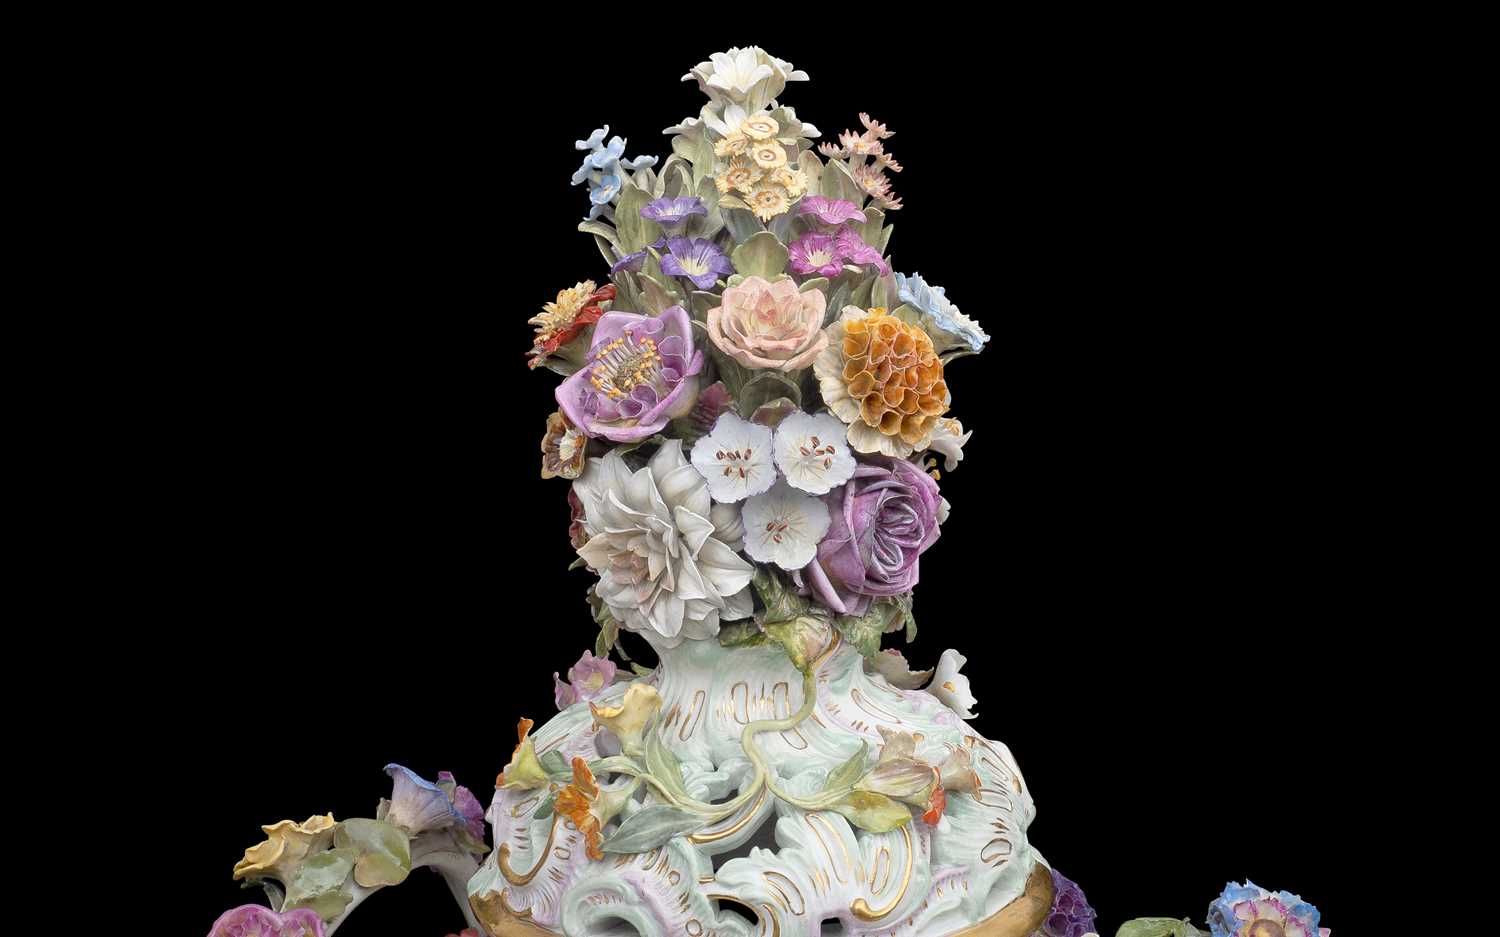 A FINE MONUMENTAL FLOWER ENCRUSTED MEISSEN VASE AND COVER, LATE 19TH / EARLY 20TH CENTURY - Image 8 of 10